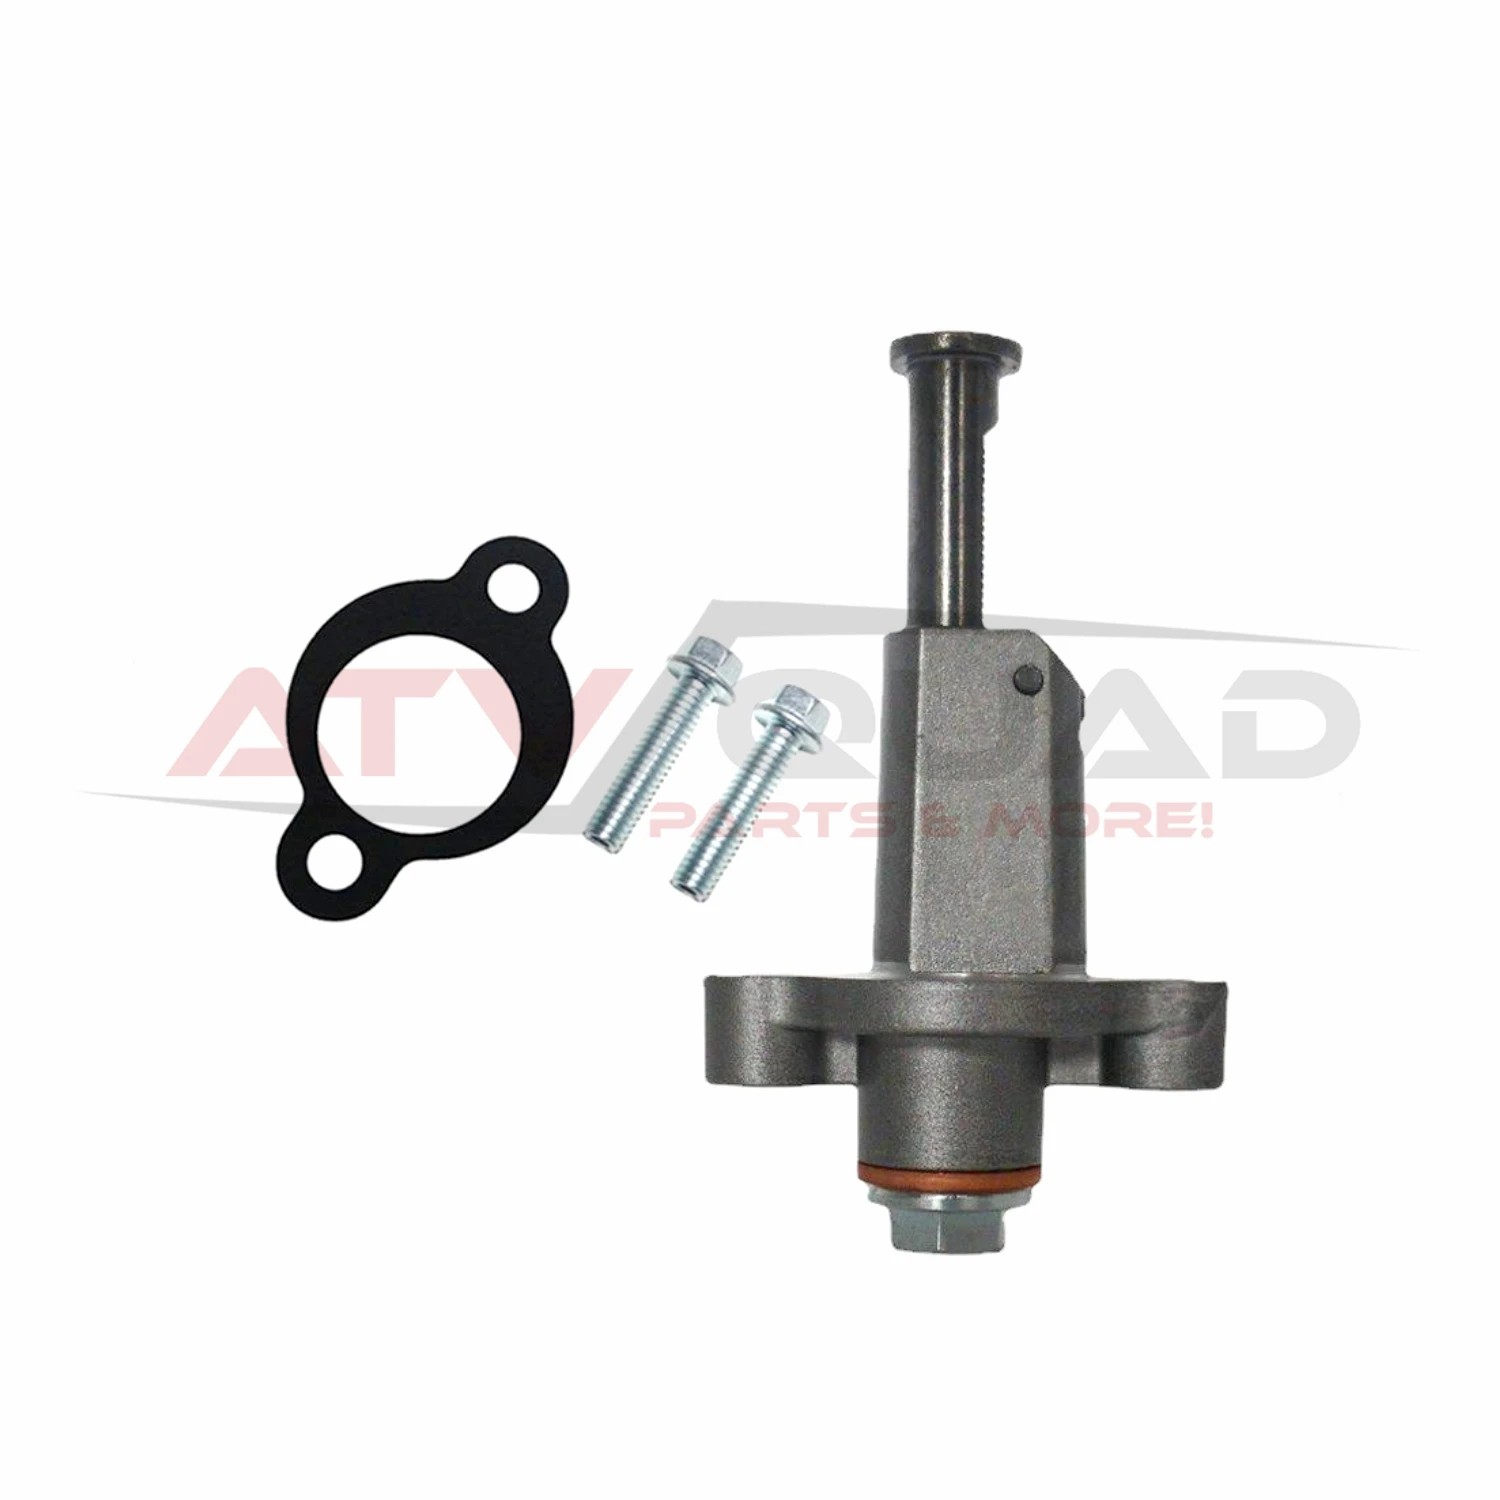 Tensioner Assy with Gasket Bolt for Stels 500 Panda 500 GT1 X500 Xinyang 500 Keeway Leone Mastiff Henger 500 Crossfire Rubicon